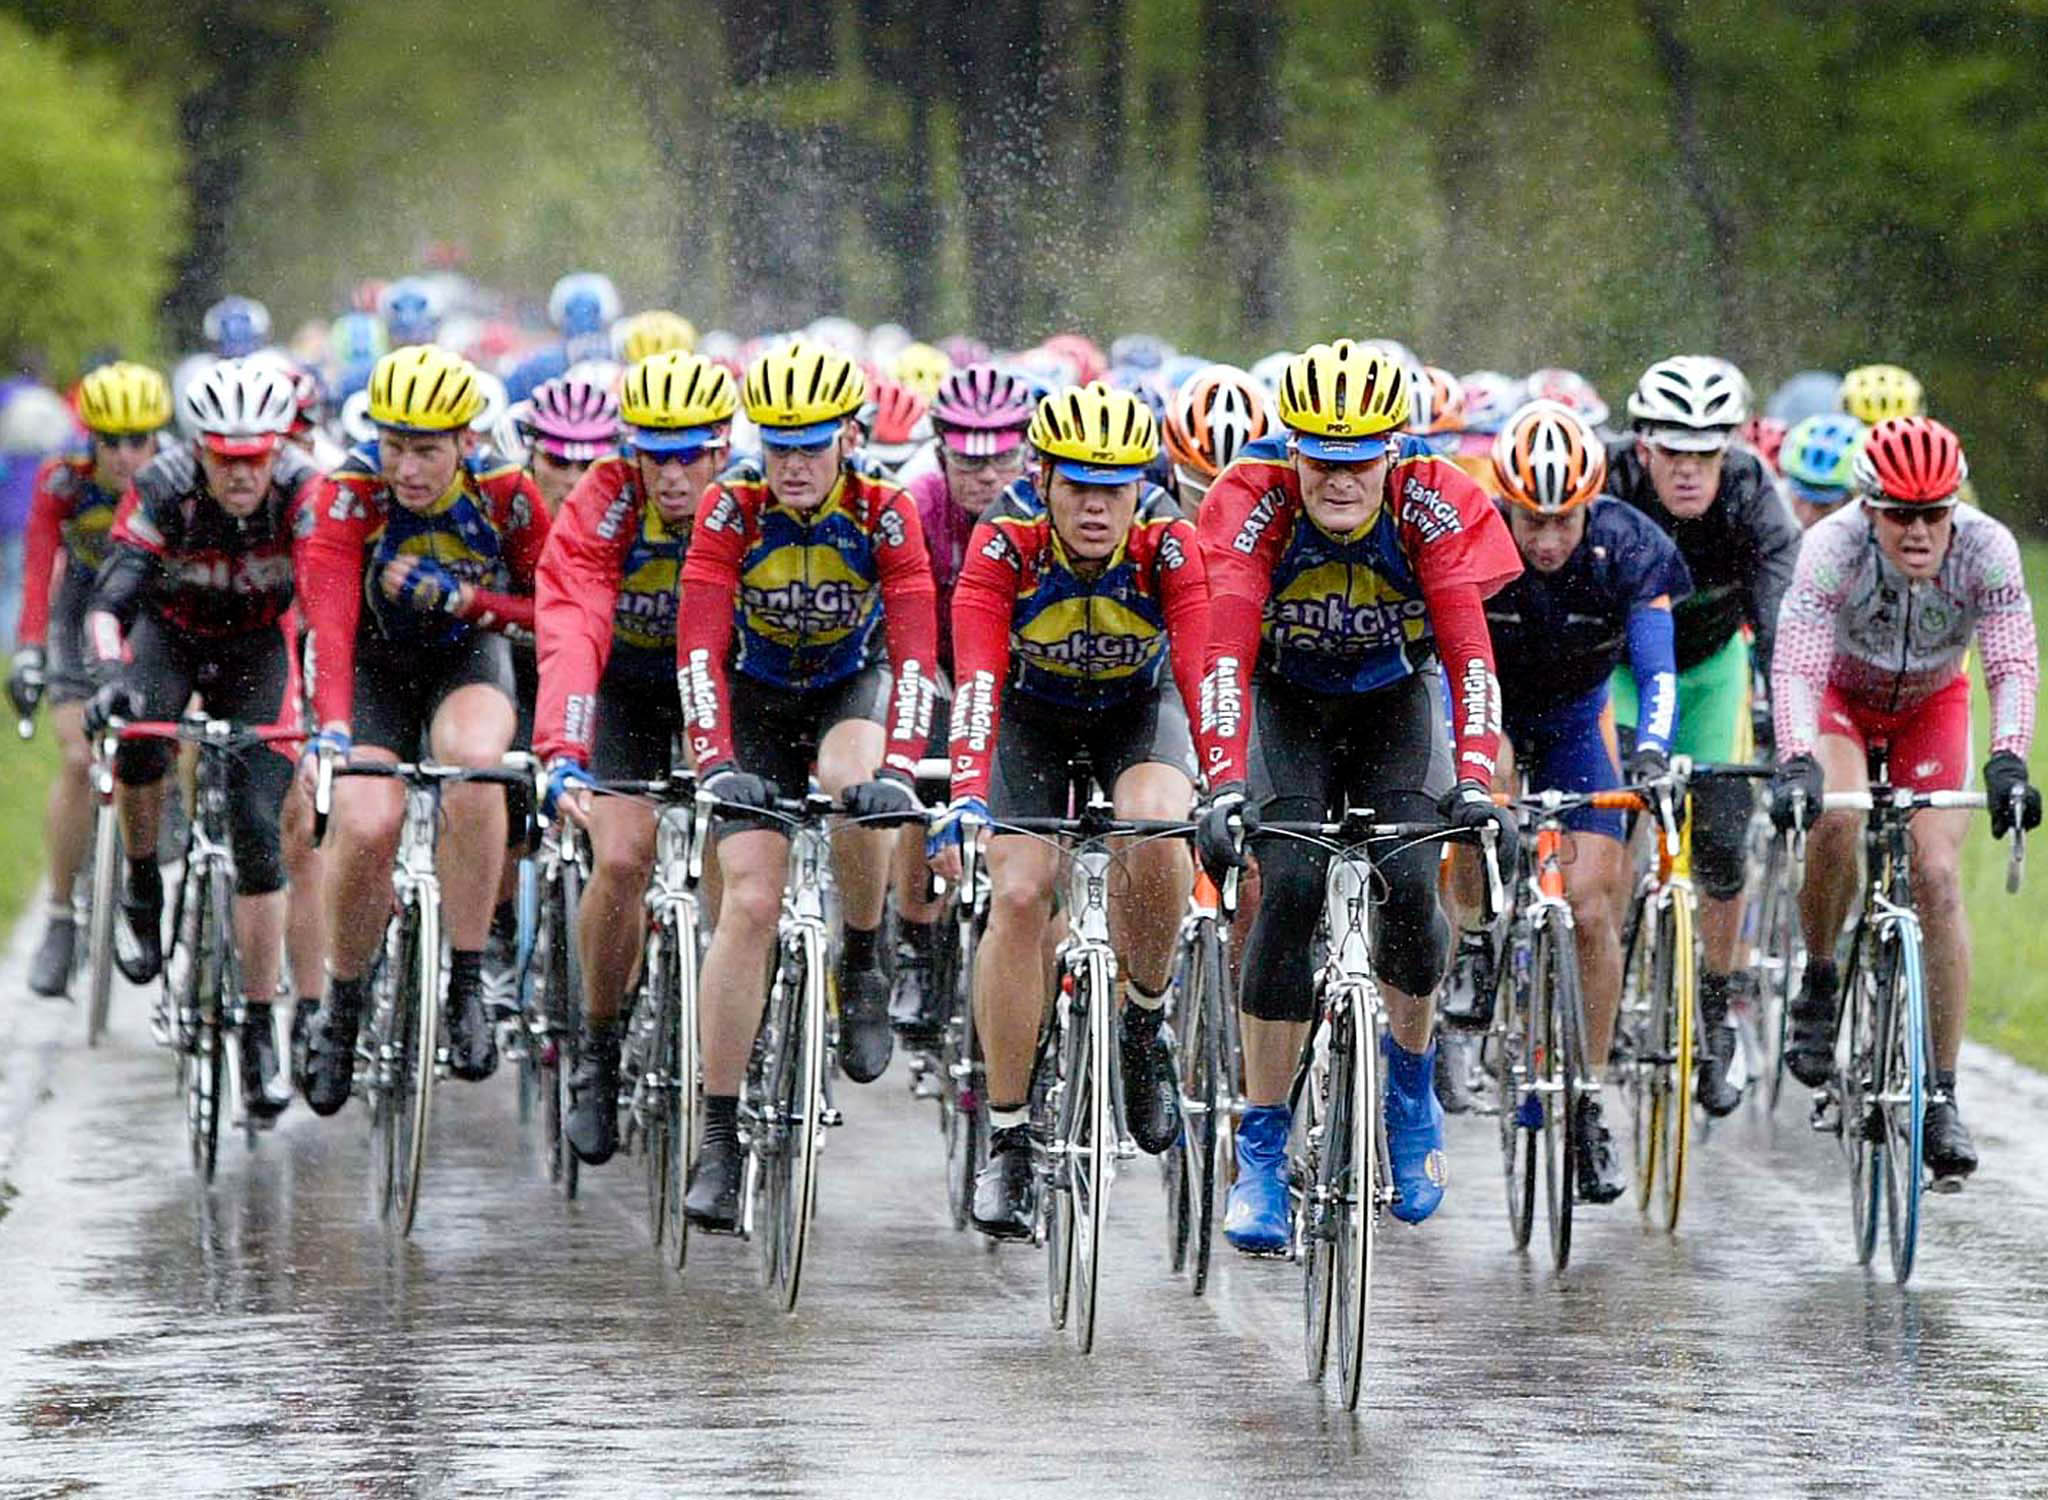 The Dutch cycling team of Bankgiro Batavus leads the pack in pouring rain just outside the town of G..